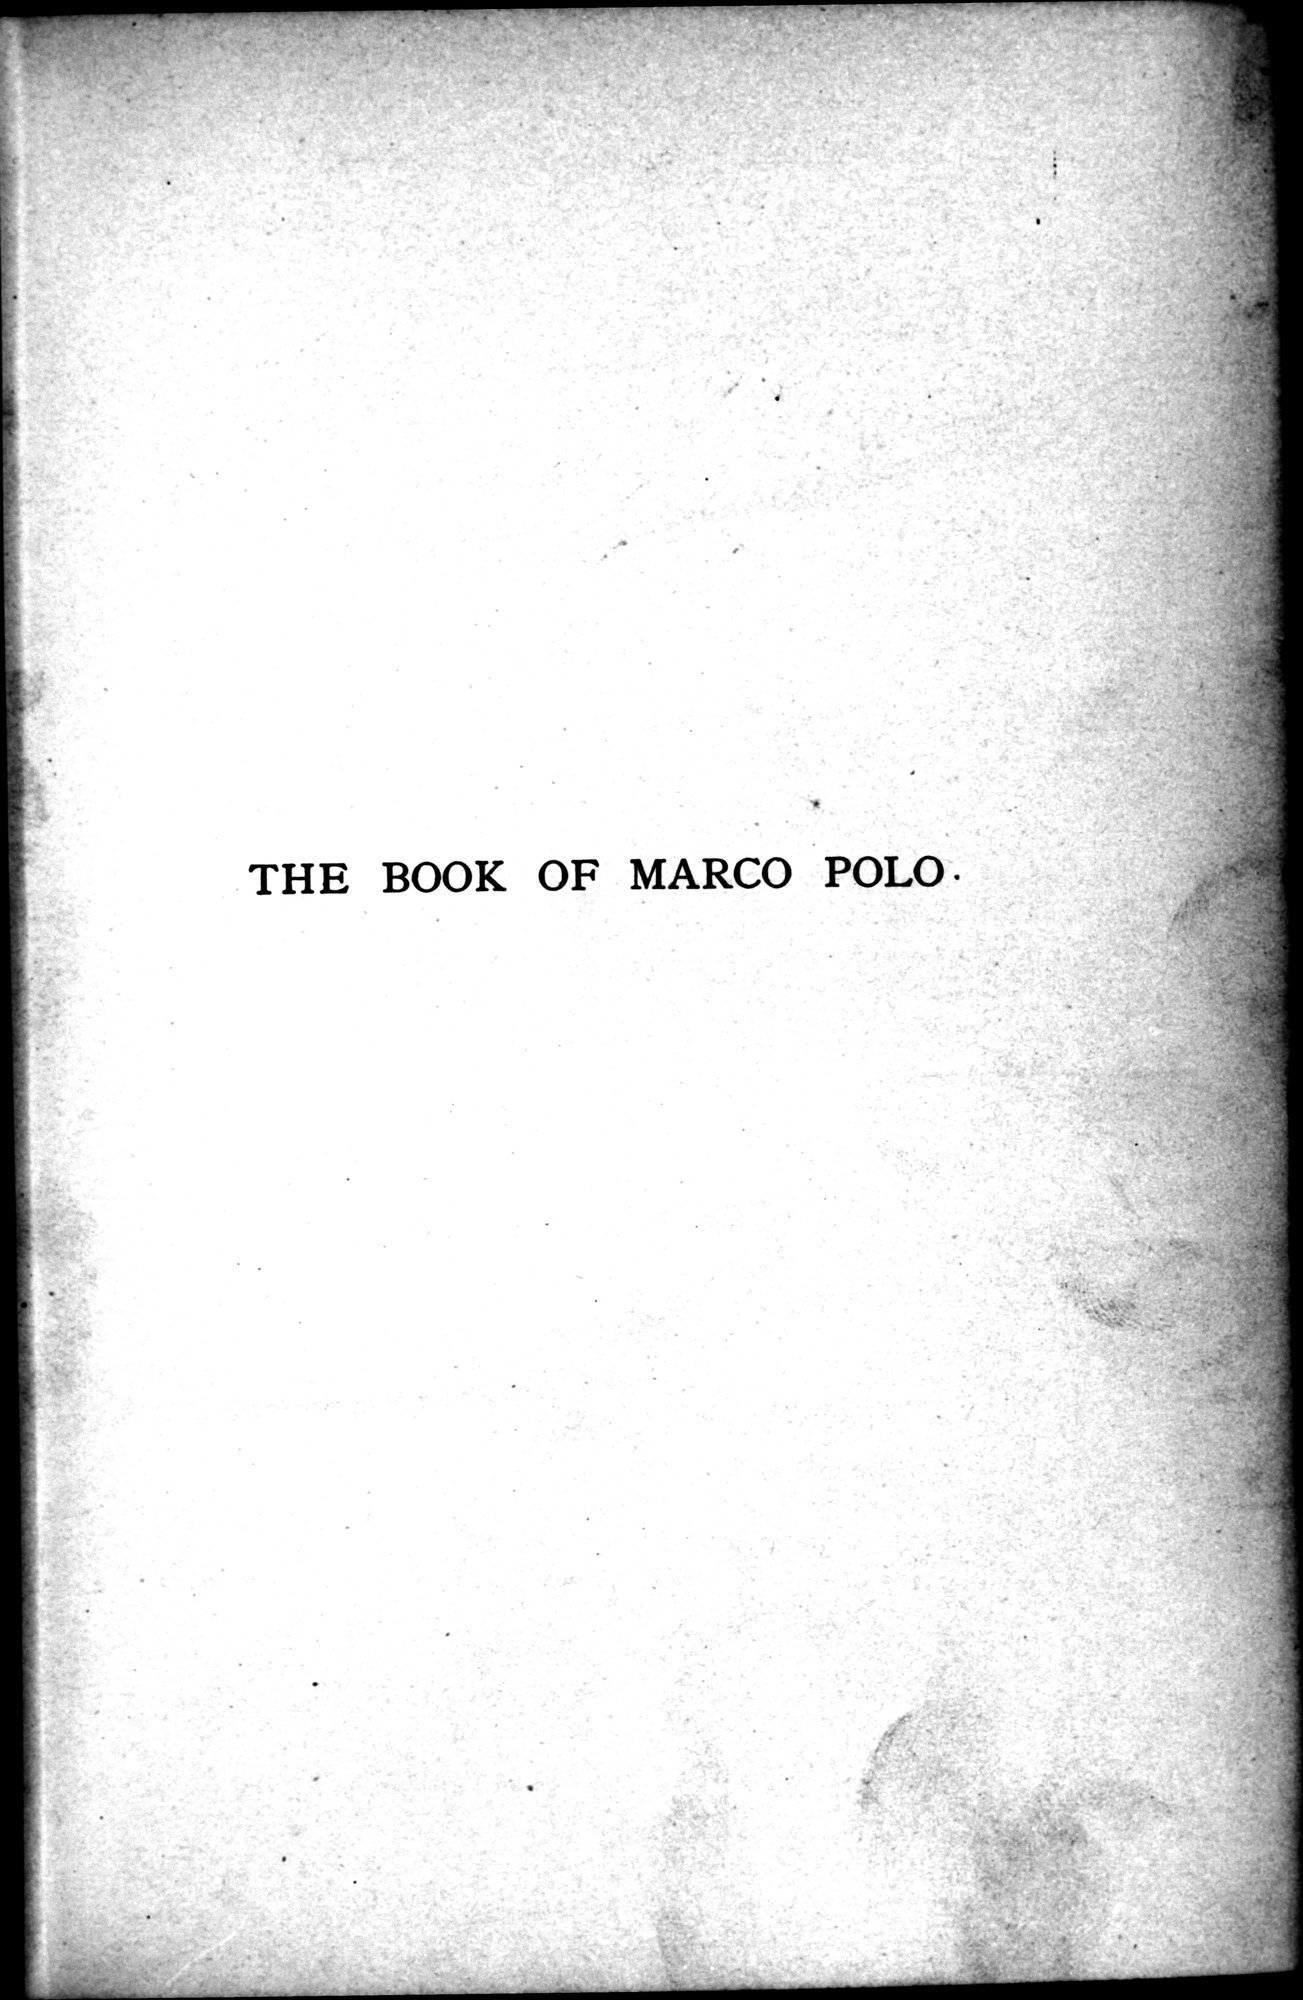 The Book of Ser Marco Polo : vol.2 / Page 31 (Grayscale High Resolution Image)